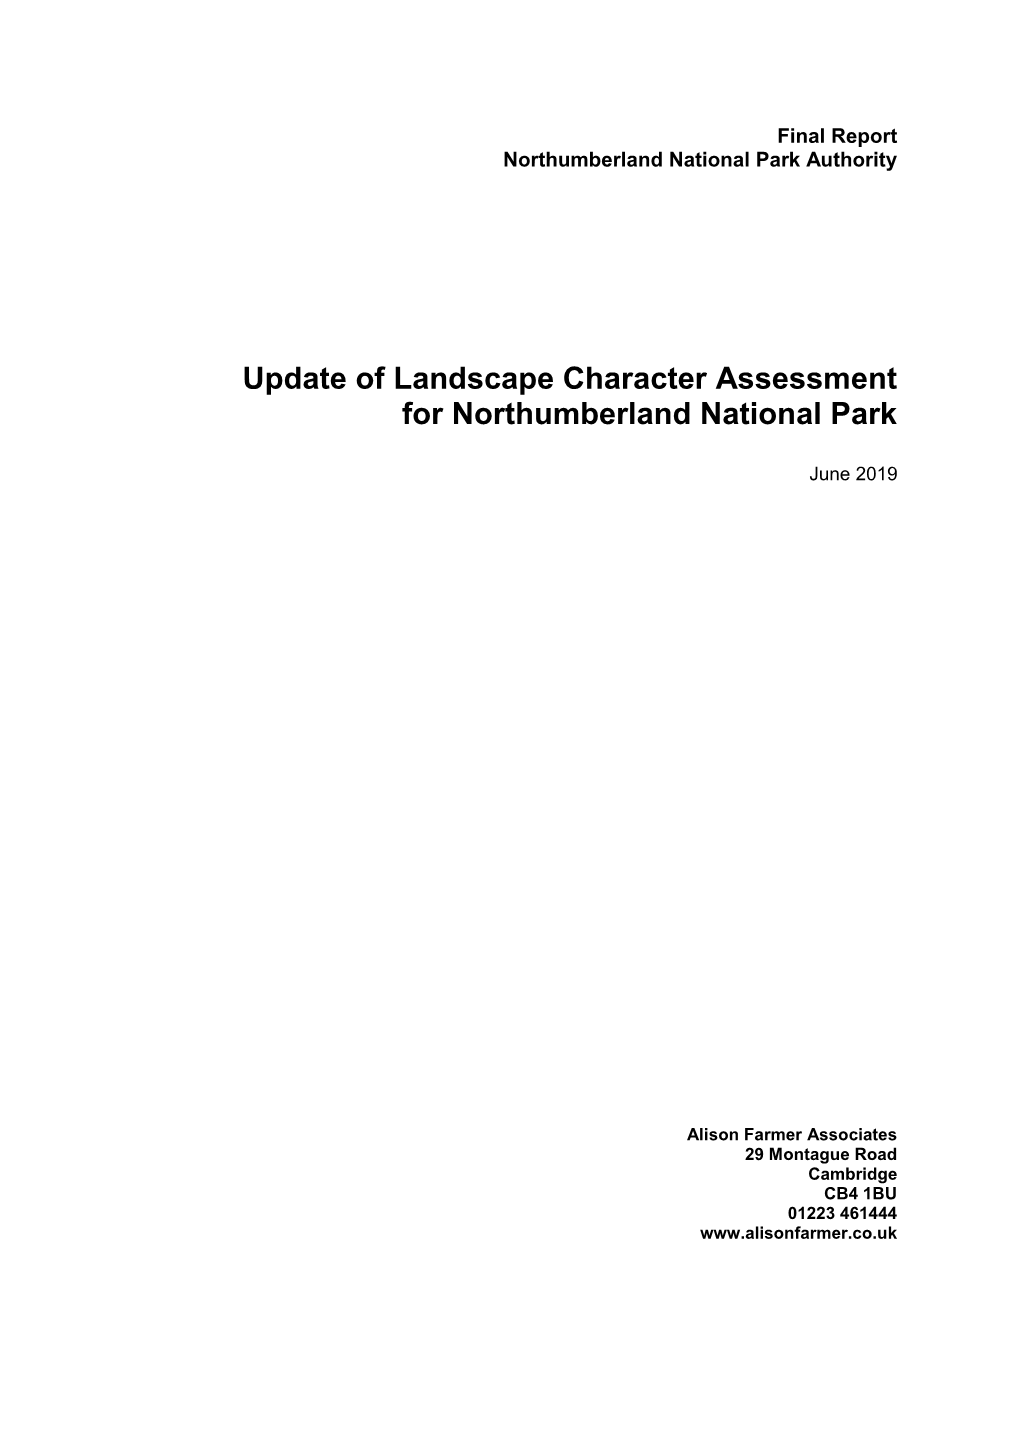 Update of Landscape Character Assessment for Northumberland National Park